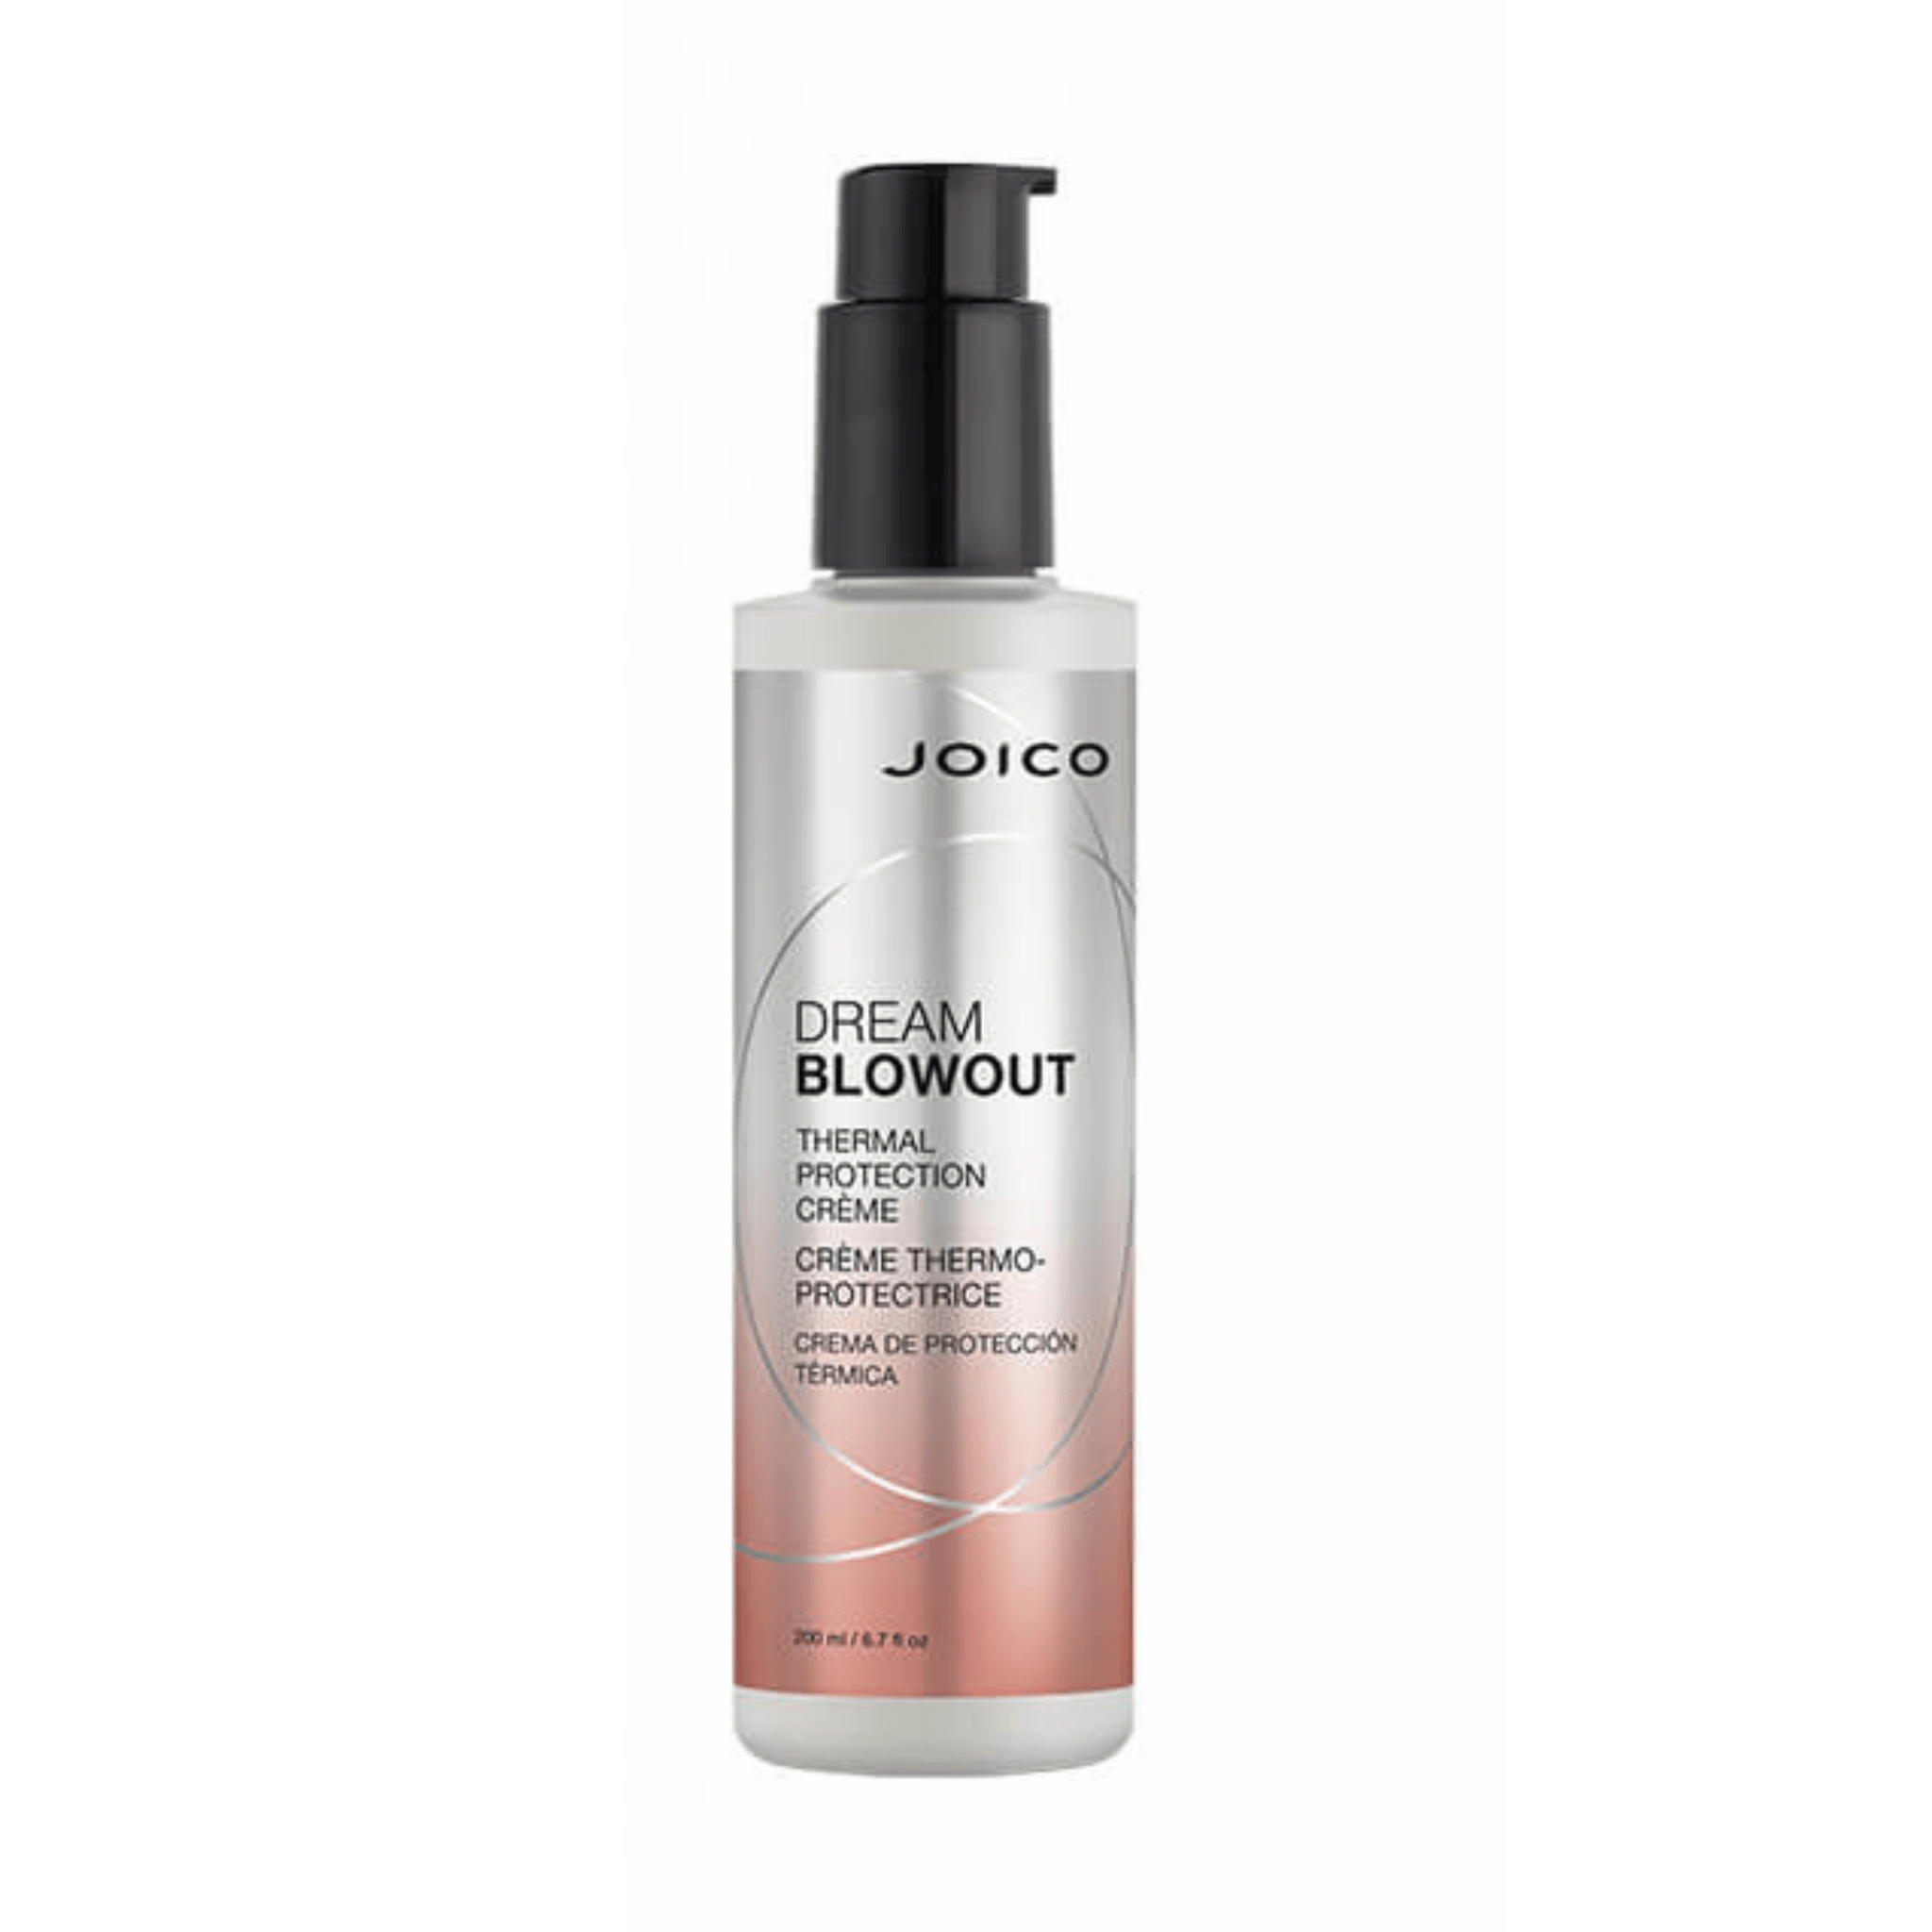 Joico. Creme Thermo-Protectrice Dream Blowout - 200 ml